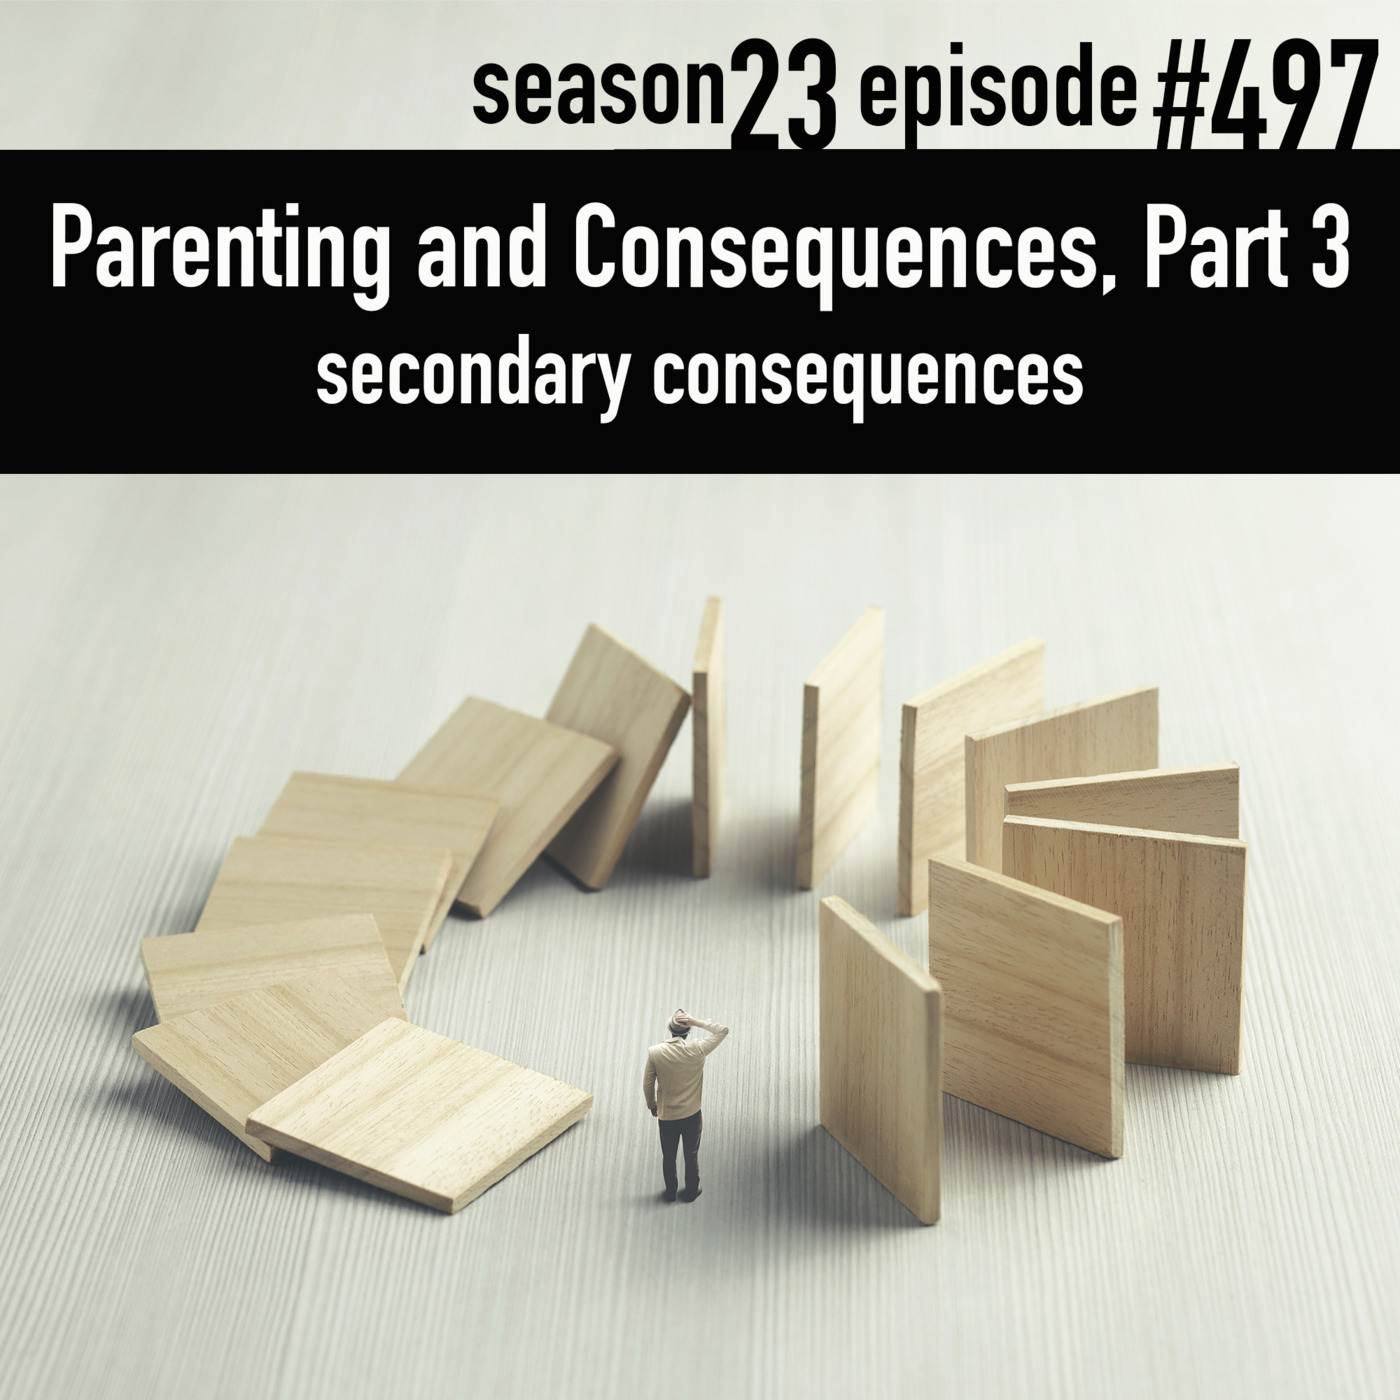 Episode 497: TLP 497: Parenting and Consequences, Part 3 | secondary consequences